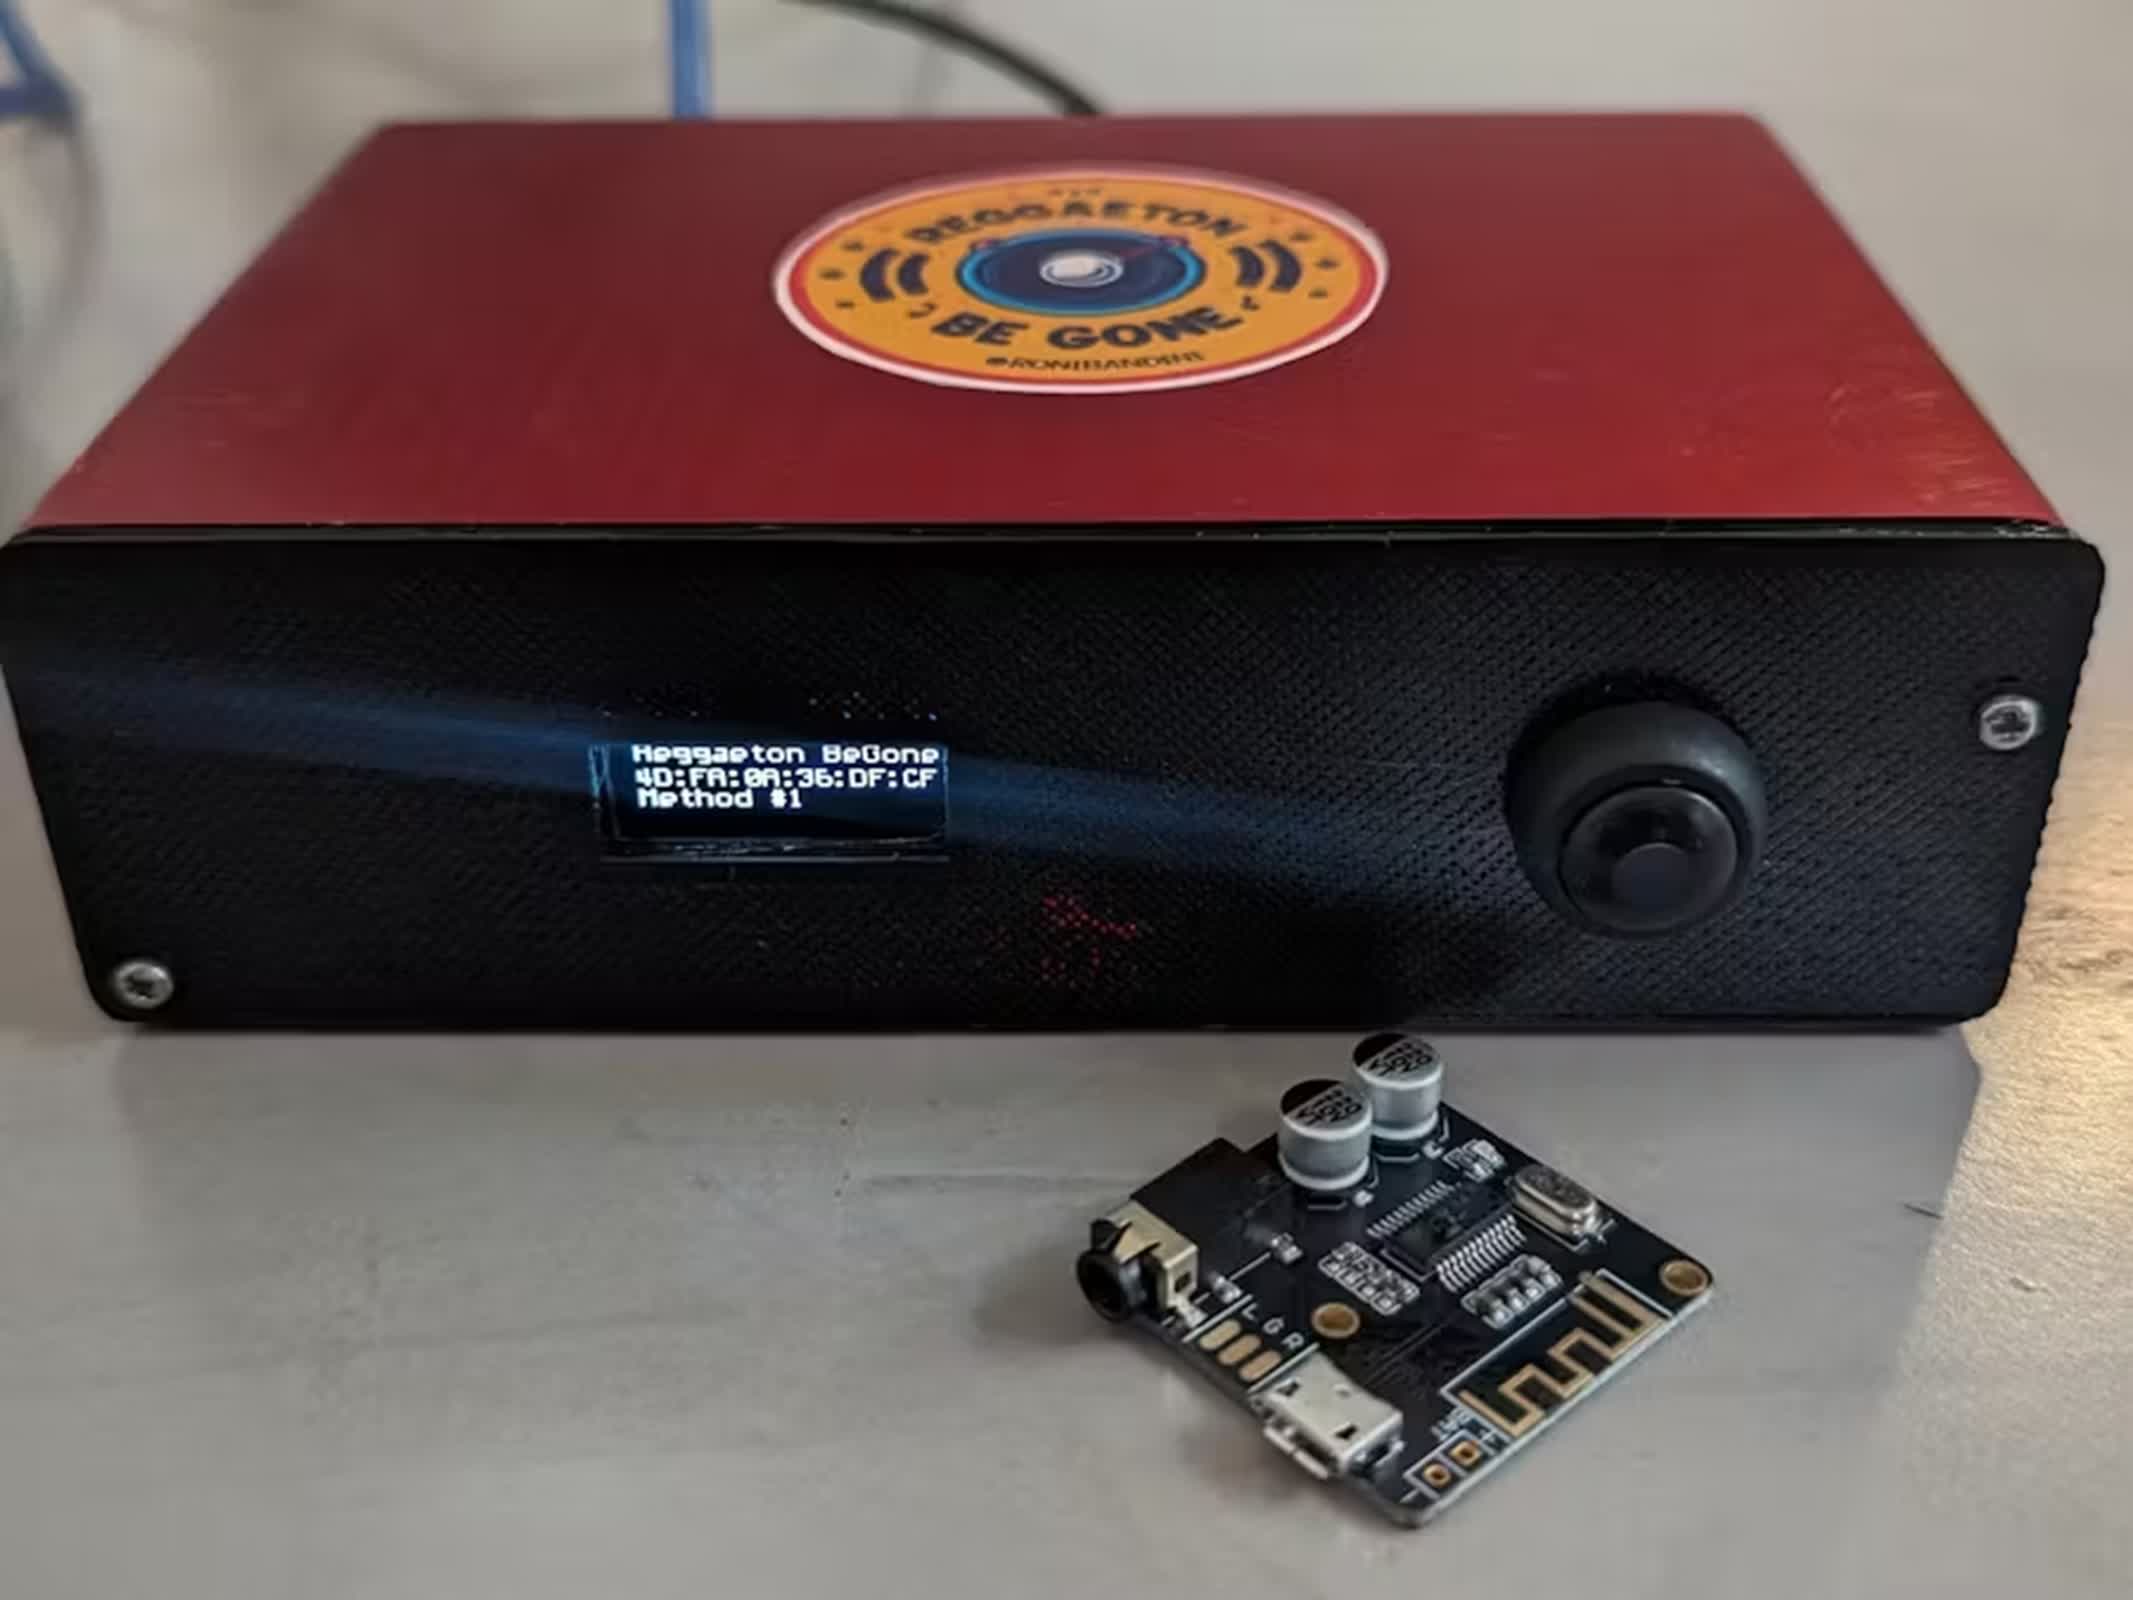 Raspberry Pi maker builds gadget to hack neighbor's Bluetooth audio system that have been streaming annoying music